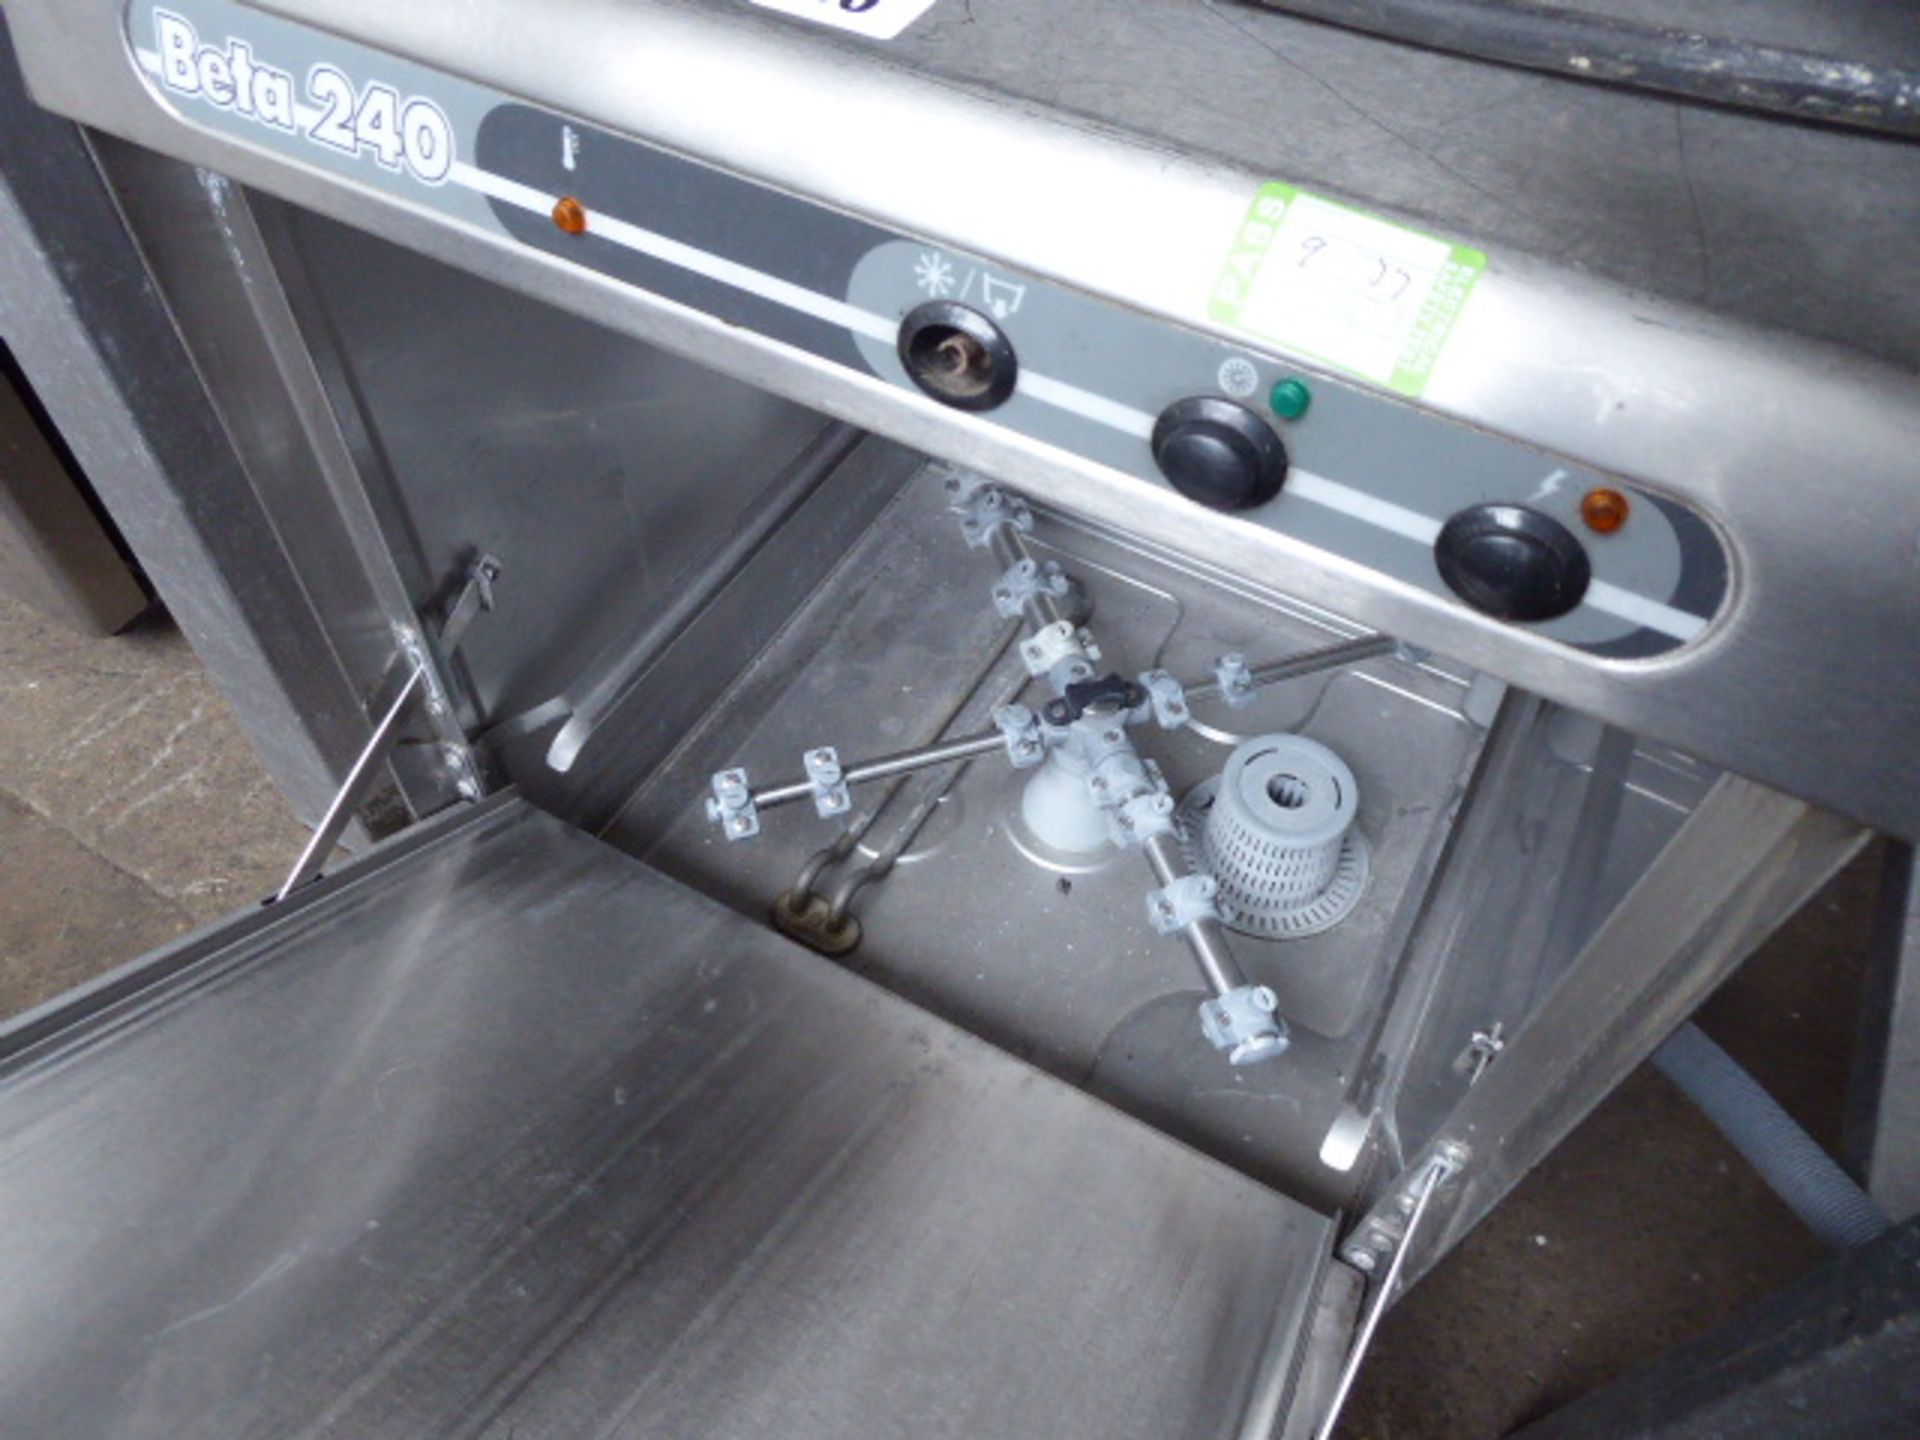 (27) 45cm Beta 240 bench top glass washer - Image 2 of 2